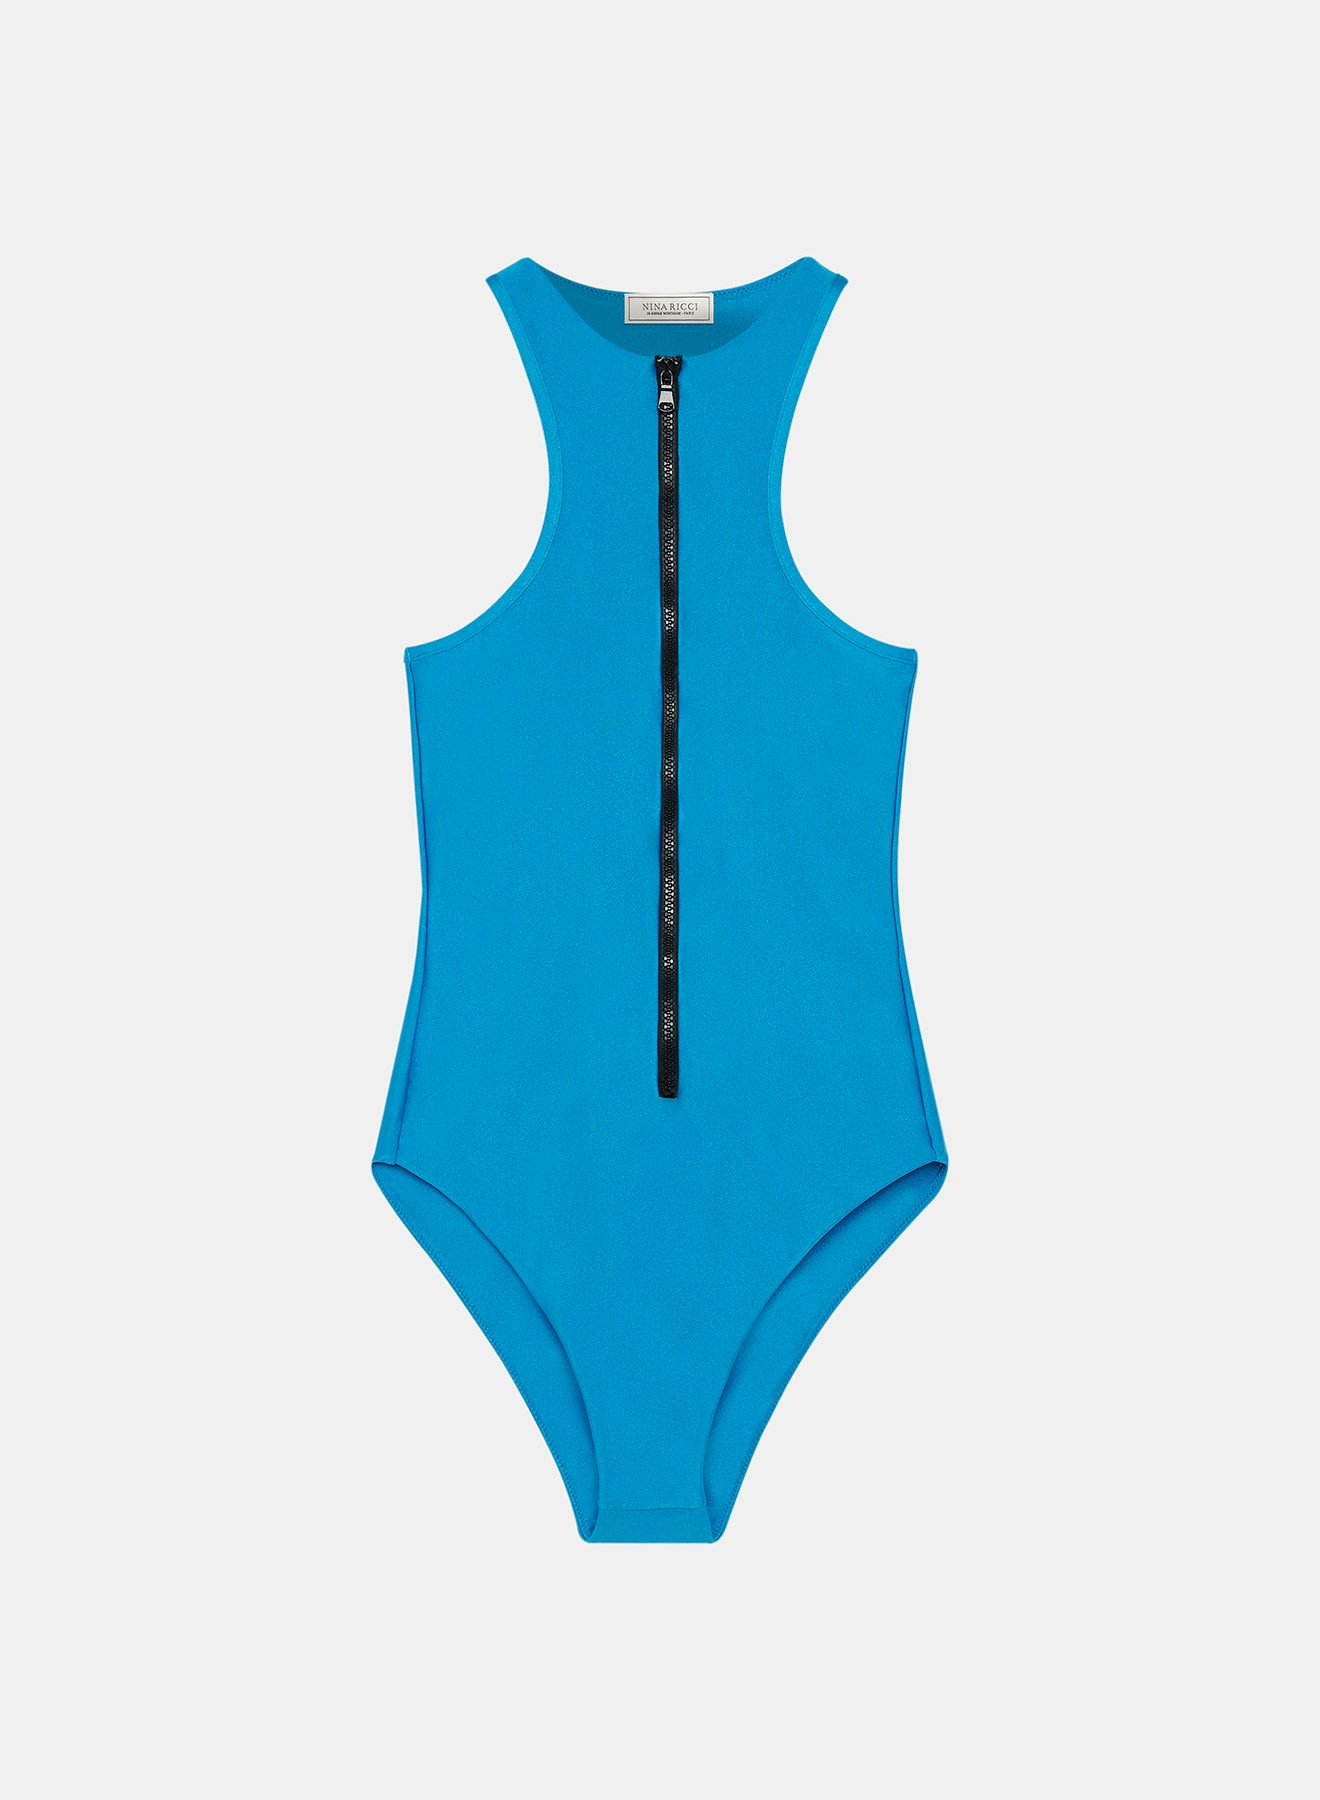 Cyan Embroidered and Zipped One-piece Swimsuit - Nina Ricci